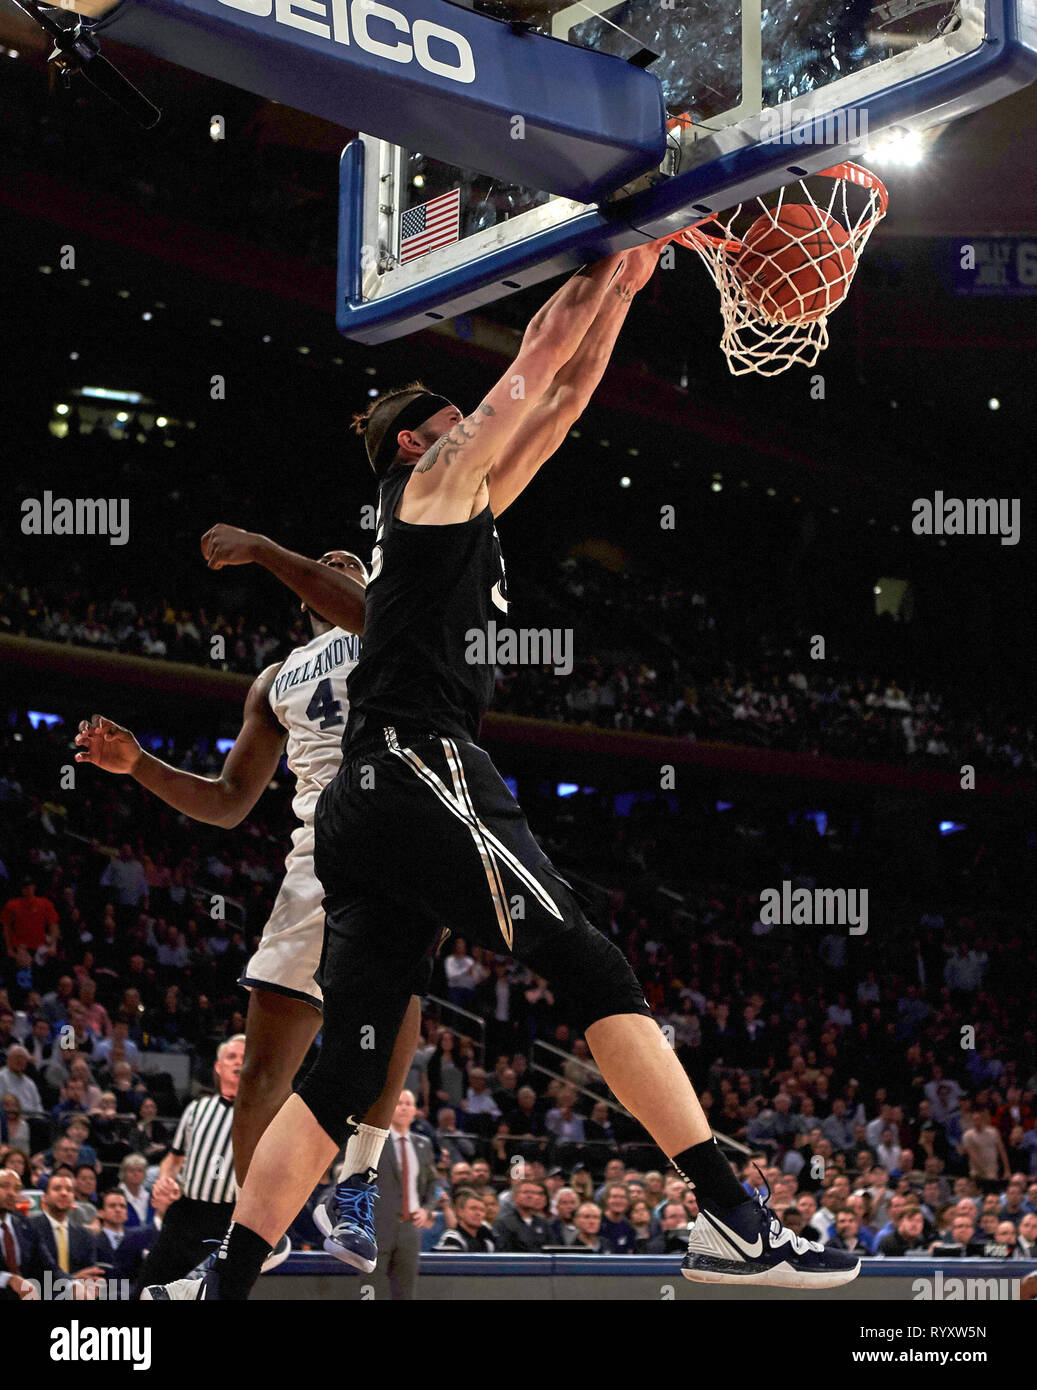 New York, New York, USA. 15th Mar, 2019. Xavier Musketeers forward Zach Hankins (35) dunks on a halley-hoop from guard Paul Scruggs (1) (not pictured) in the second half during semifinal round of the Big East Tournament between the Xavier Musketeers and the Villanova Wildcats at Madison Square Garden in New York City. Villanova defeated Xavier in overtime 71-67. Duncan Williams/CSM/Alamy Live News Stock Photo